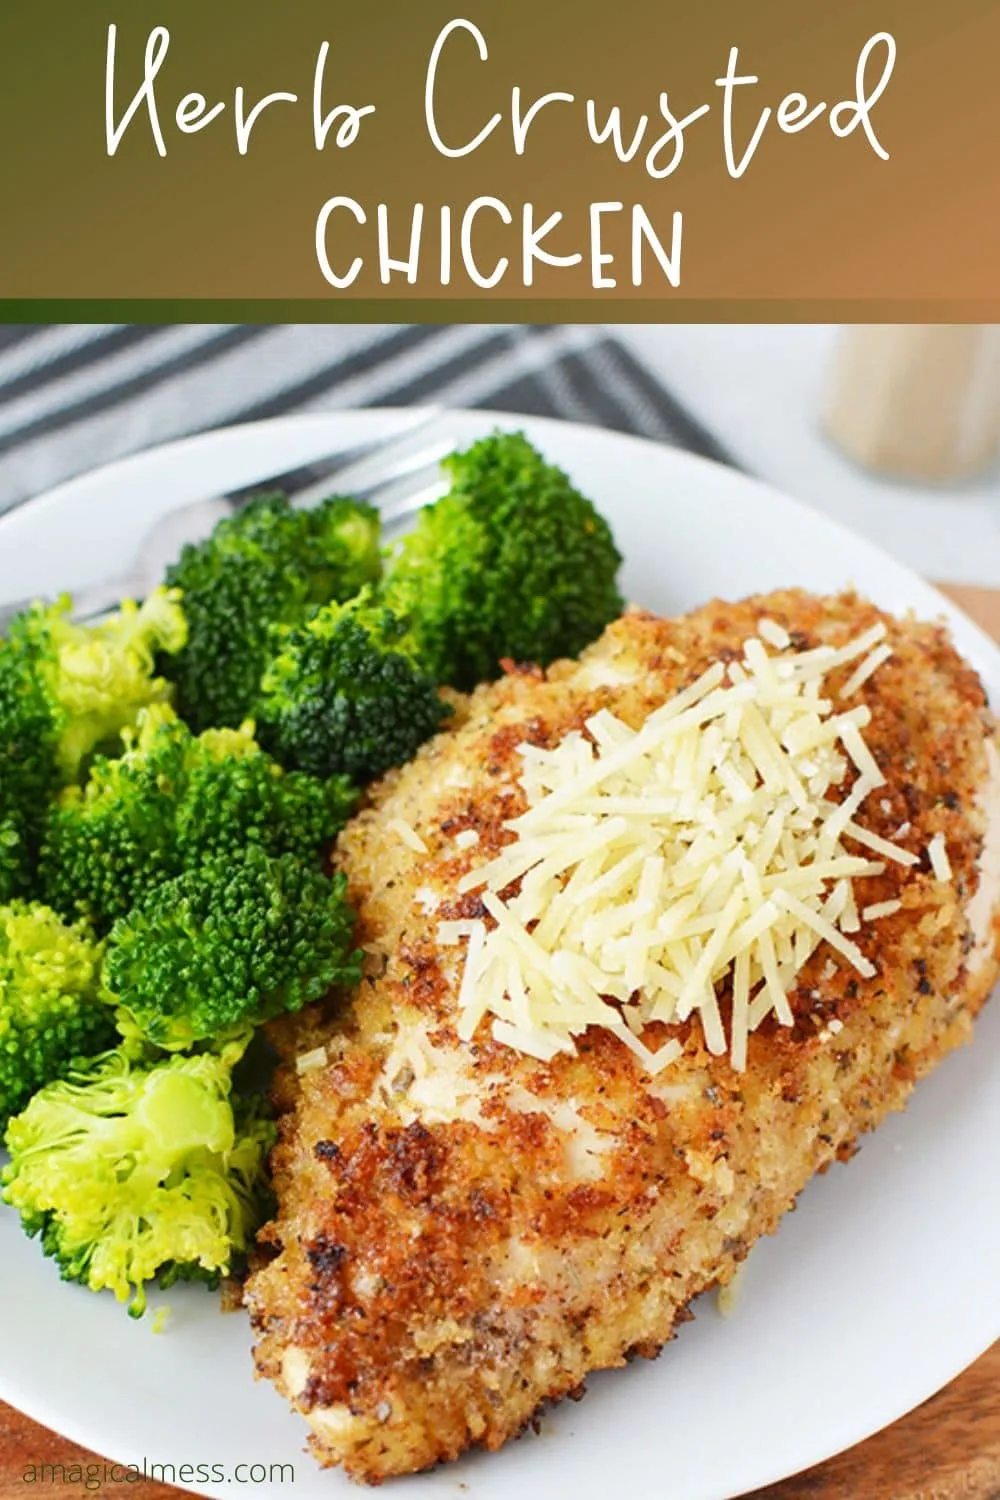 Herb crusted chicken dinner on a plate